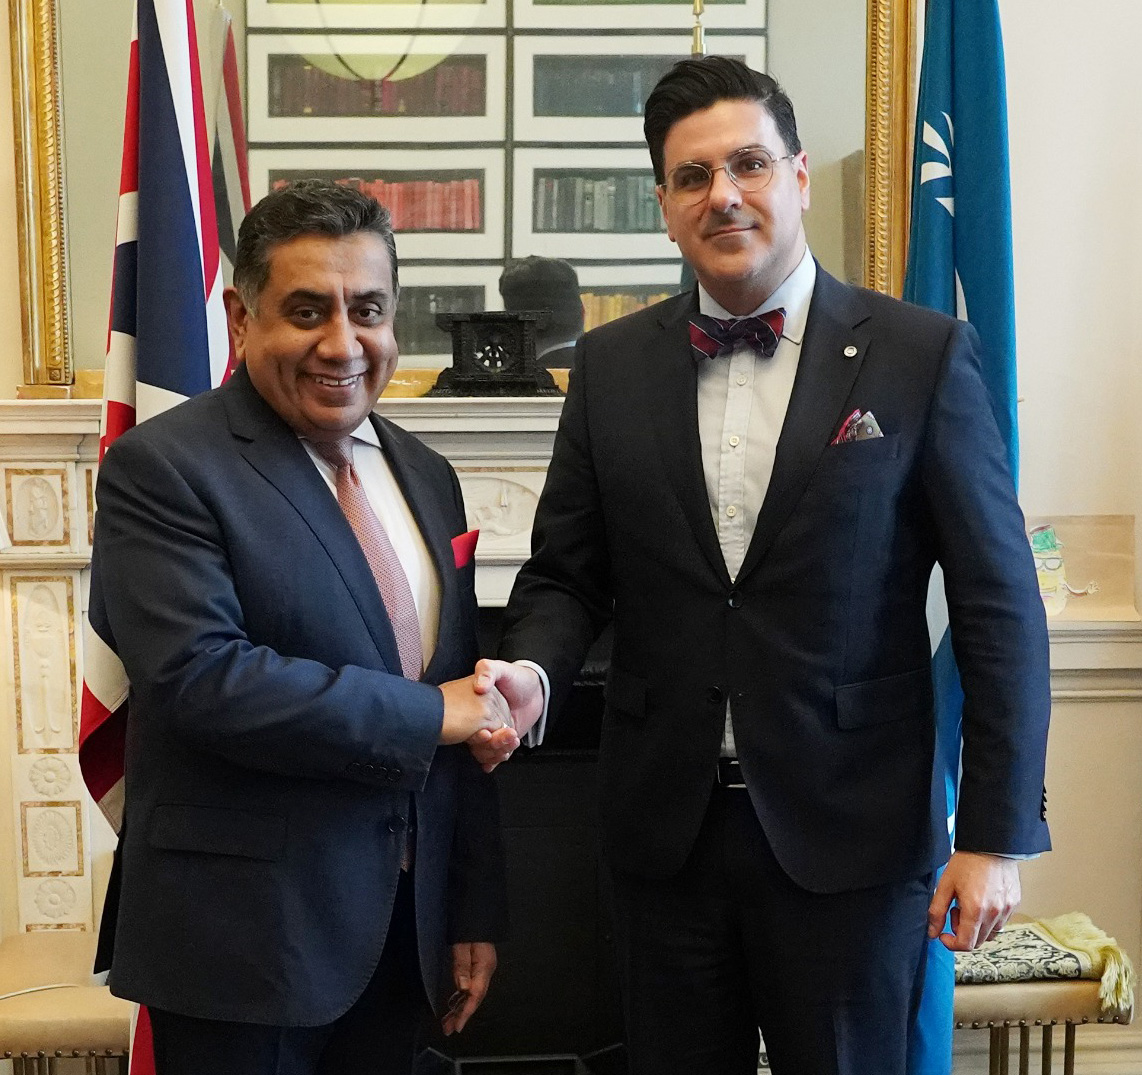 #BuildingSupport: #ICC thanks #UnitedKingdom for voluntary contribution to its Special Fund for Security, to reinforce the Court’s cyber security. 📷 ICC Registrar Osvaldo Zavala Giler met with Minister of State Lord (Tariq) Ahmad of Wimbledon @tariqahmadbt @GOVUK